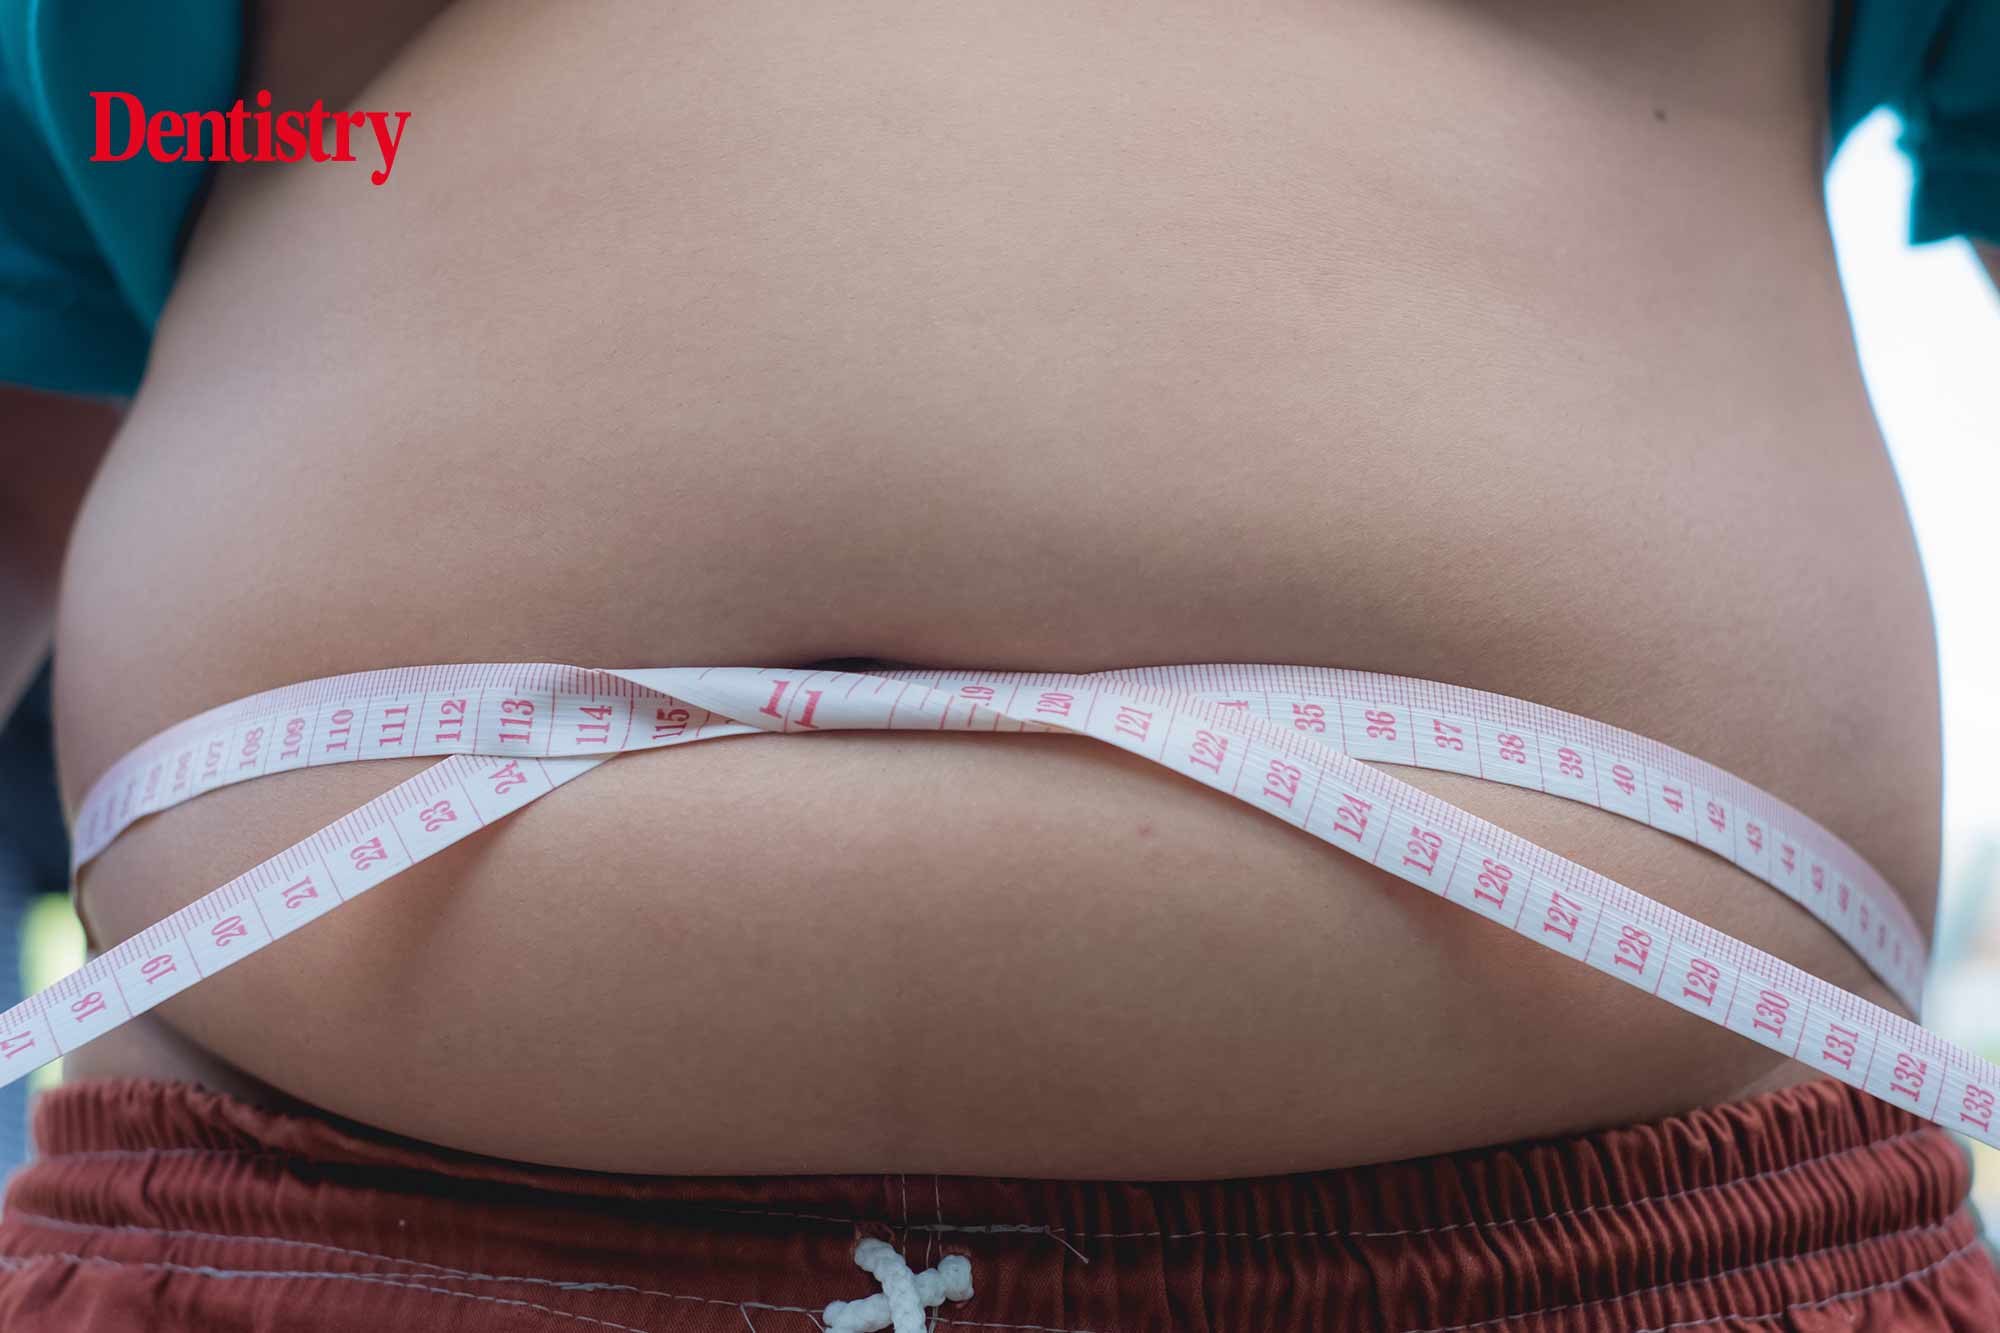 Children grow up obese due to health inequalities, says think tank